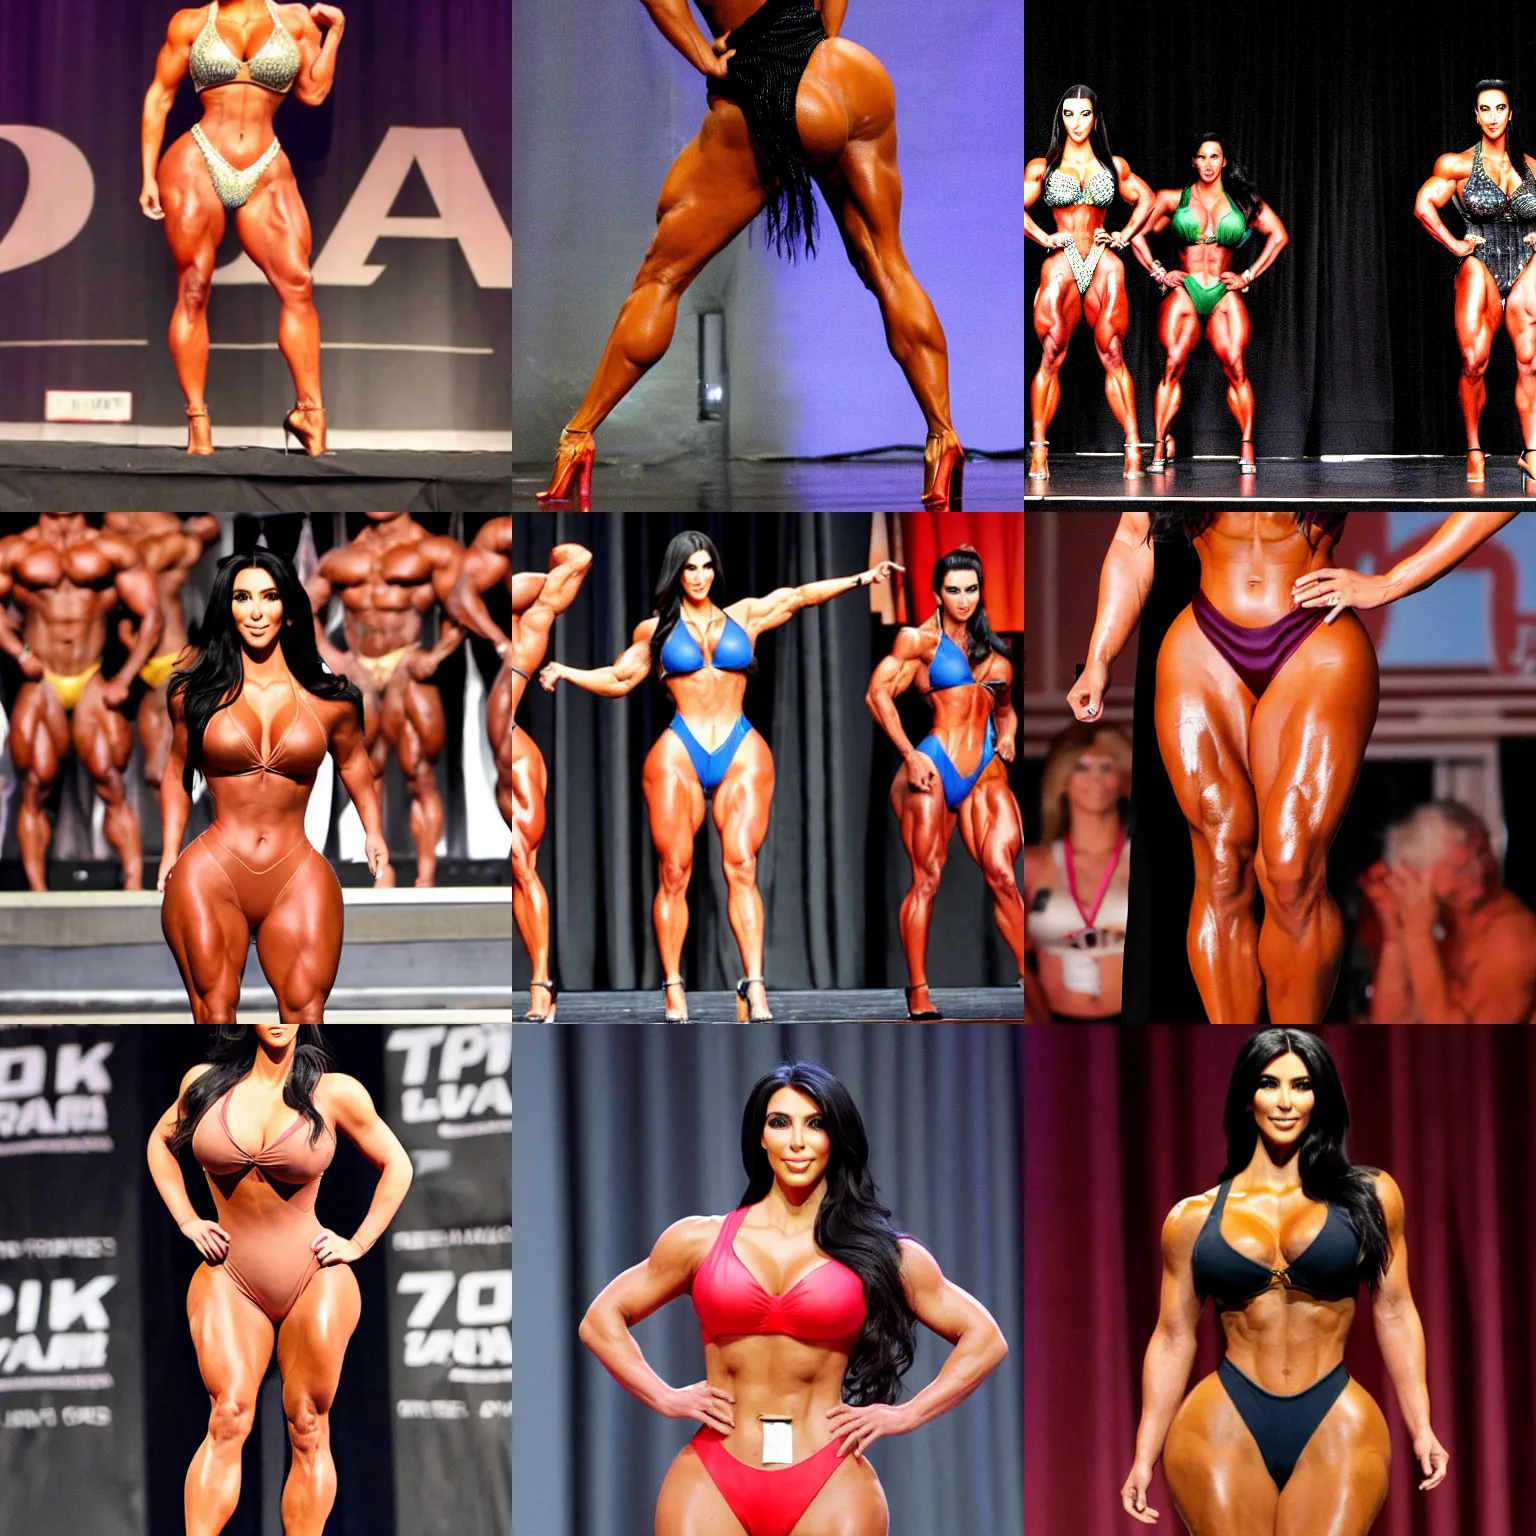 Prompt: kim kardashian posing on stage at a bodybuilding competition